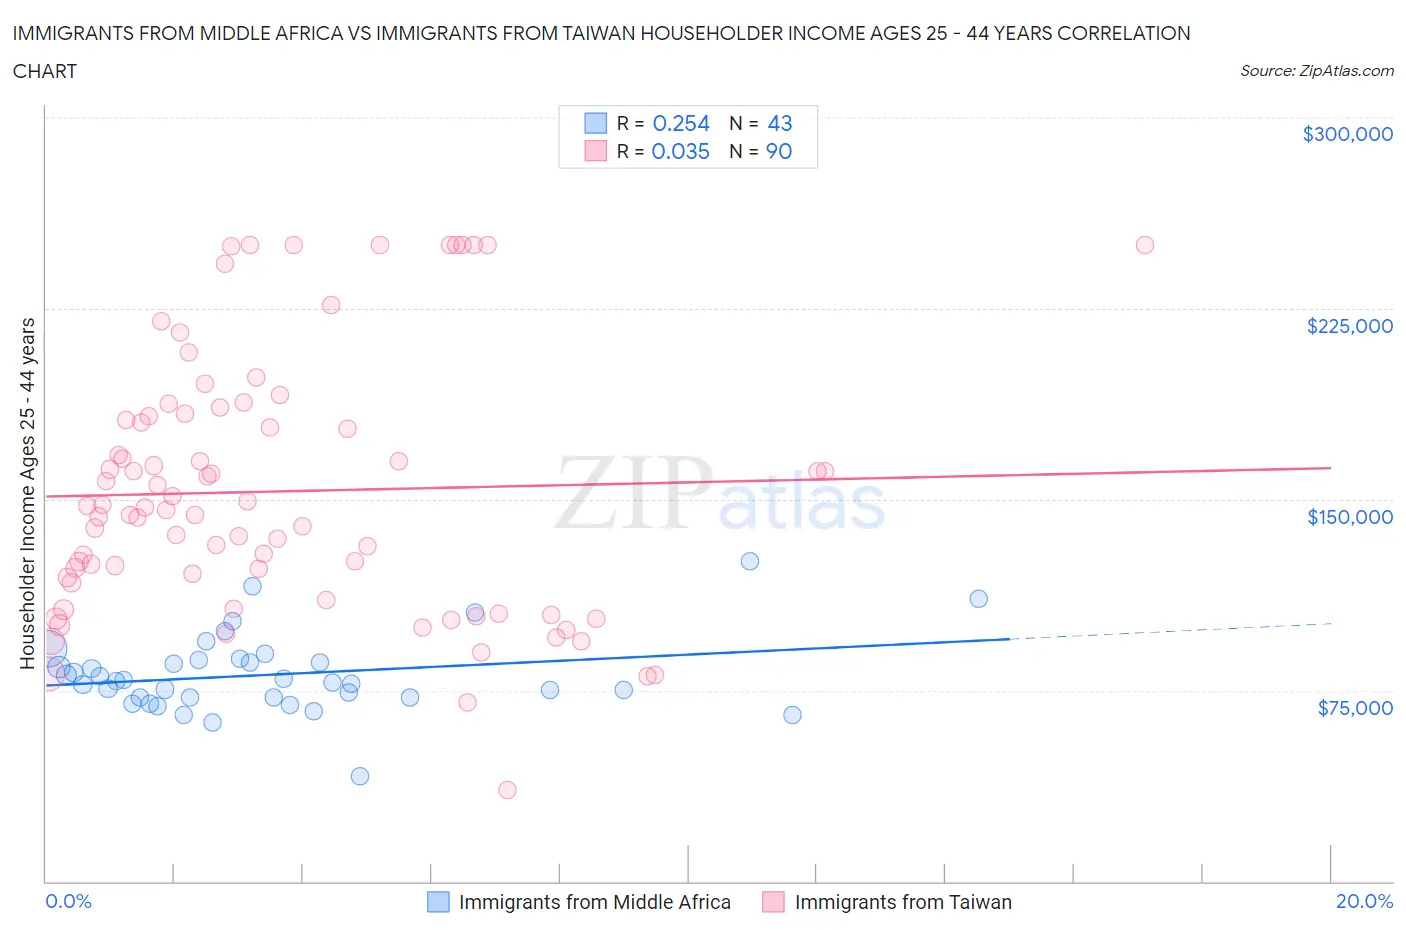 Immigrants from Middle Africa vs Immigrants from Taiwan Householder Income Ages 25 - 44 years